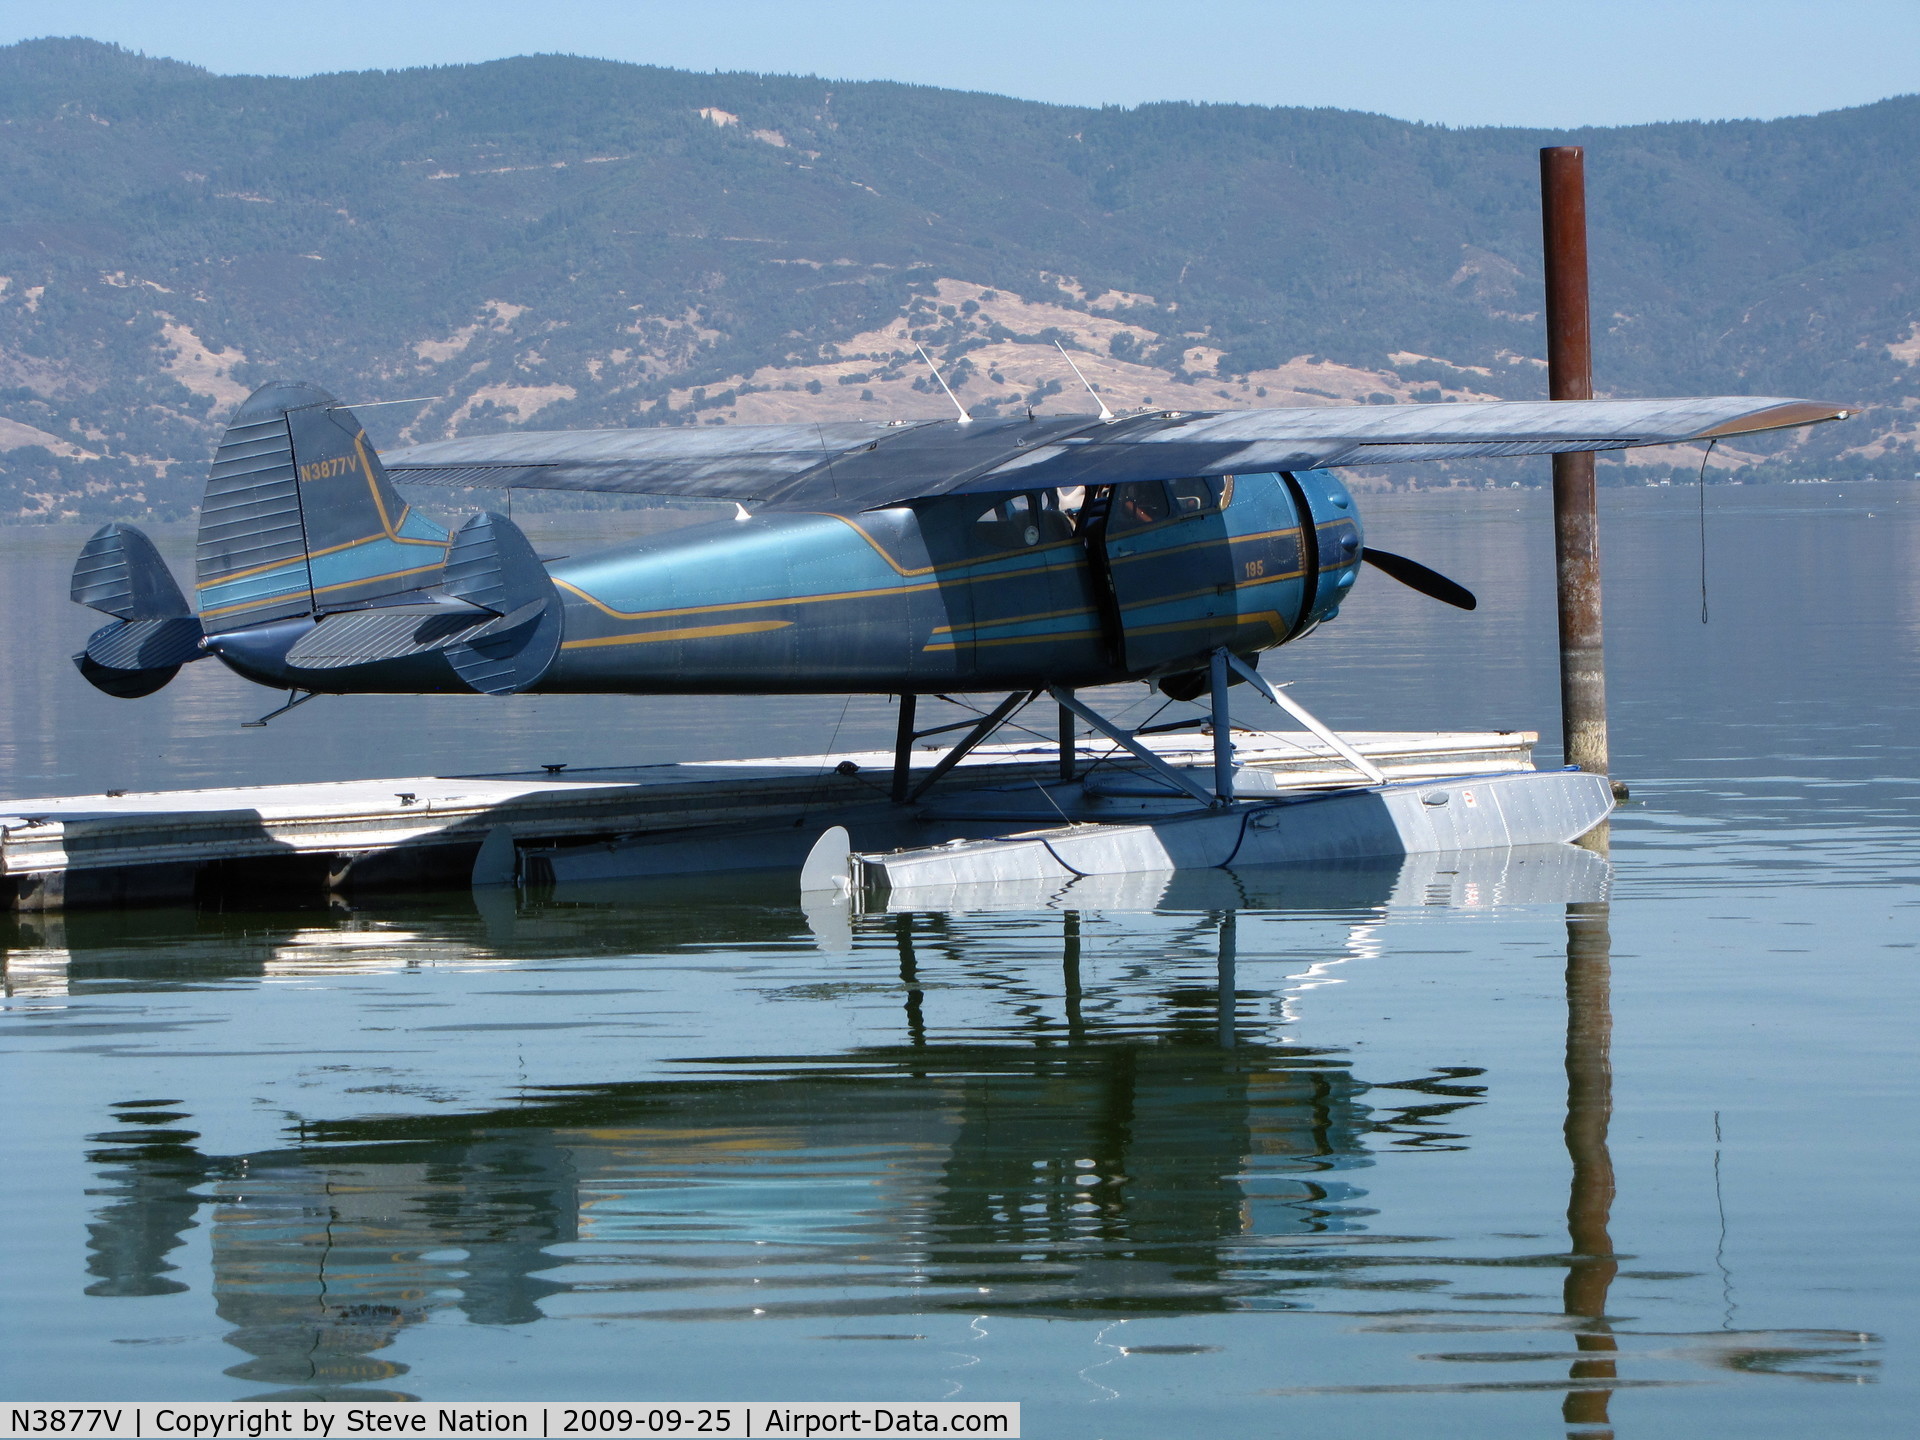 N3877V, 1949 Cessna 195 C/N 7339, Float-equipped 1949 Cessna 195 at Clear Lake boat dock near Lakeport, CA